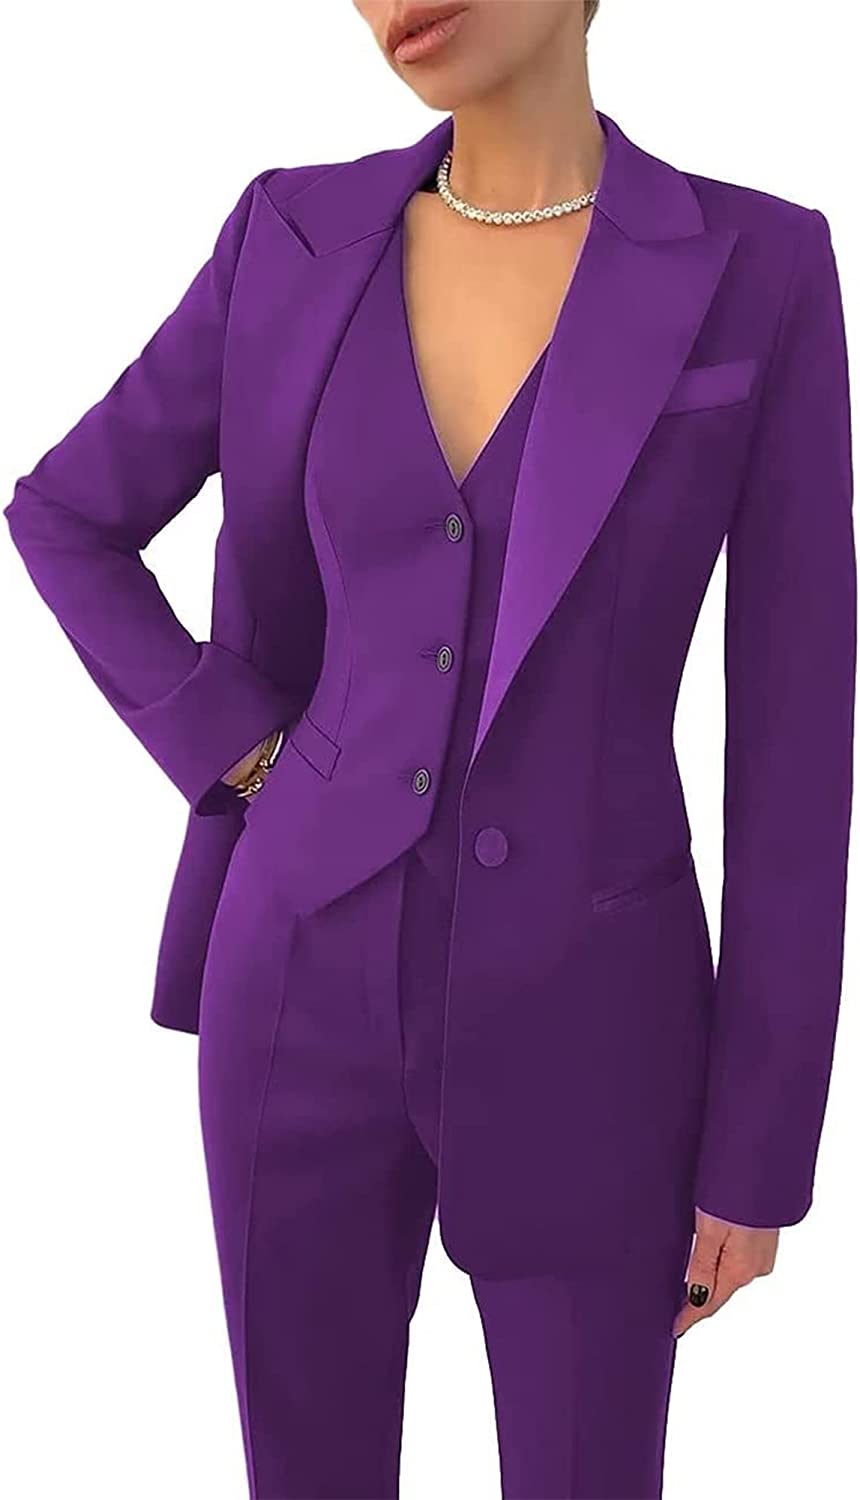 This item is unavailable -   Suits for women, Formal suits for women,  Ladies trouser suits